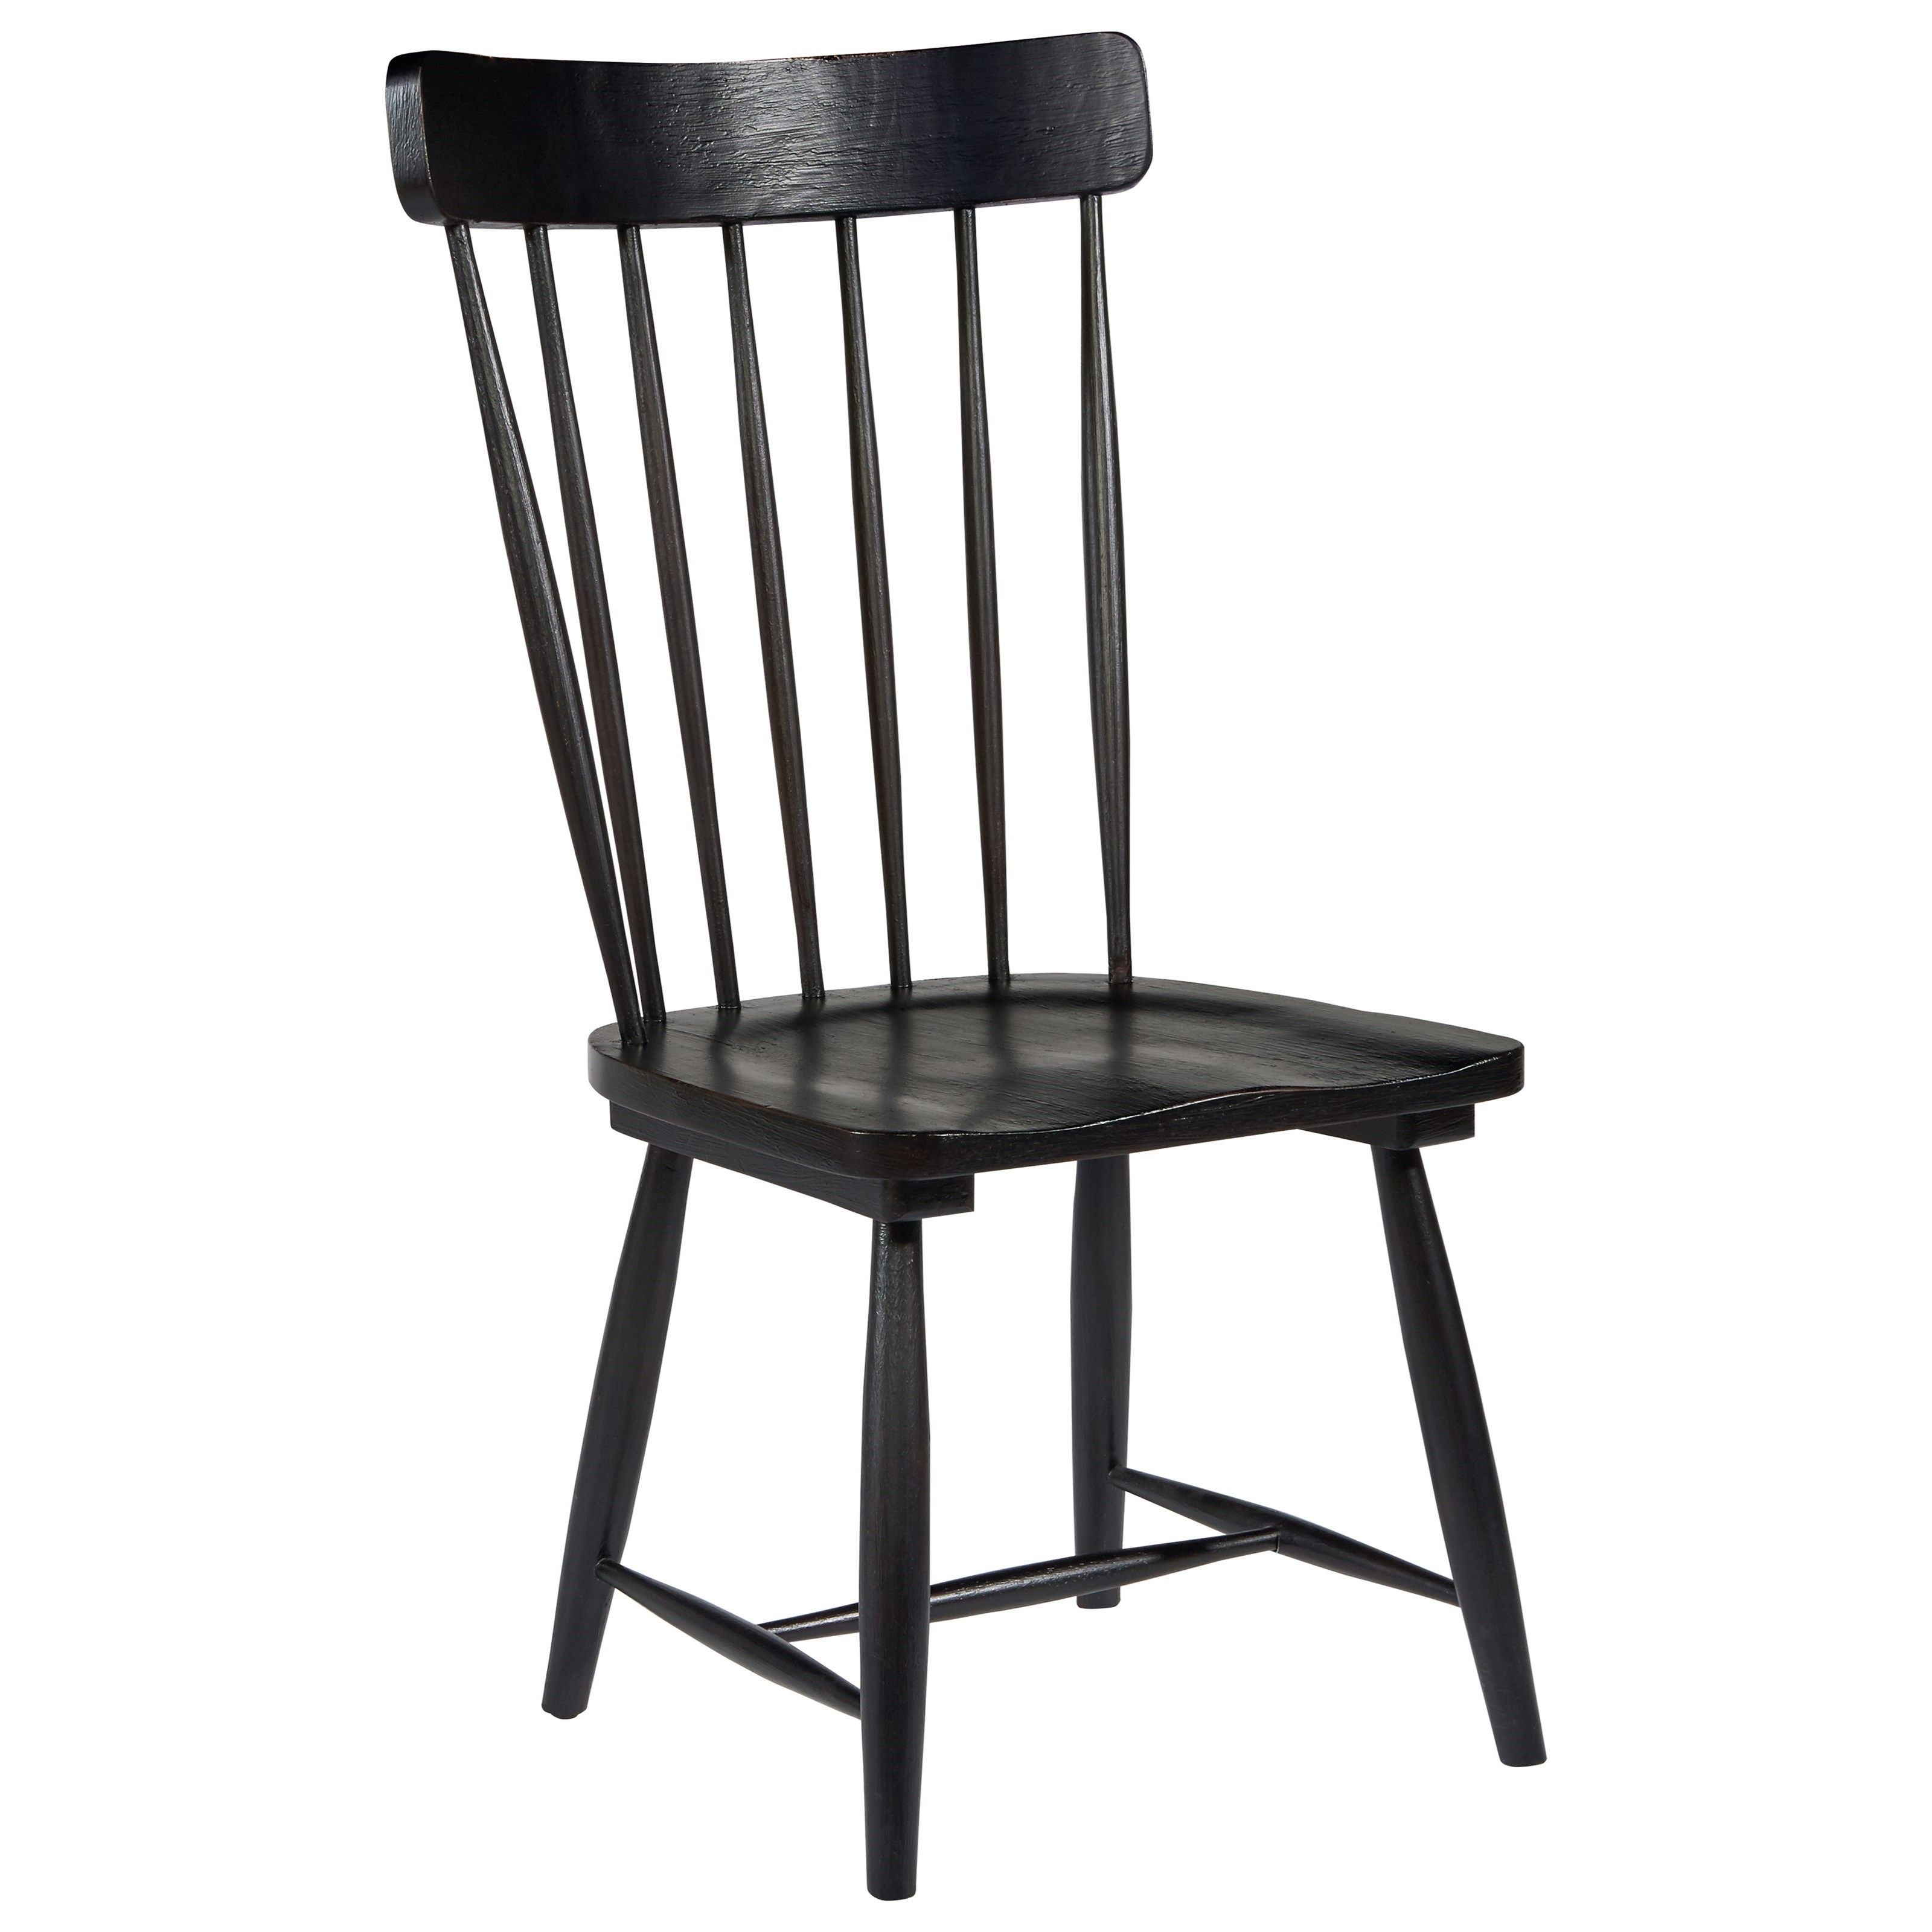 Magnolia Home Hamilton Saddle Side Chairs For Best And Newest Magnolia Homejoanna Gaines Farmhouse Spindle Back Side Chair (Photo 3 of 20)